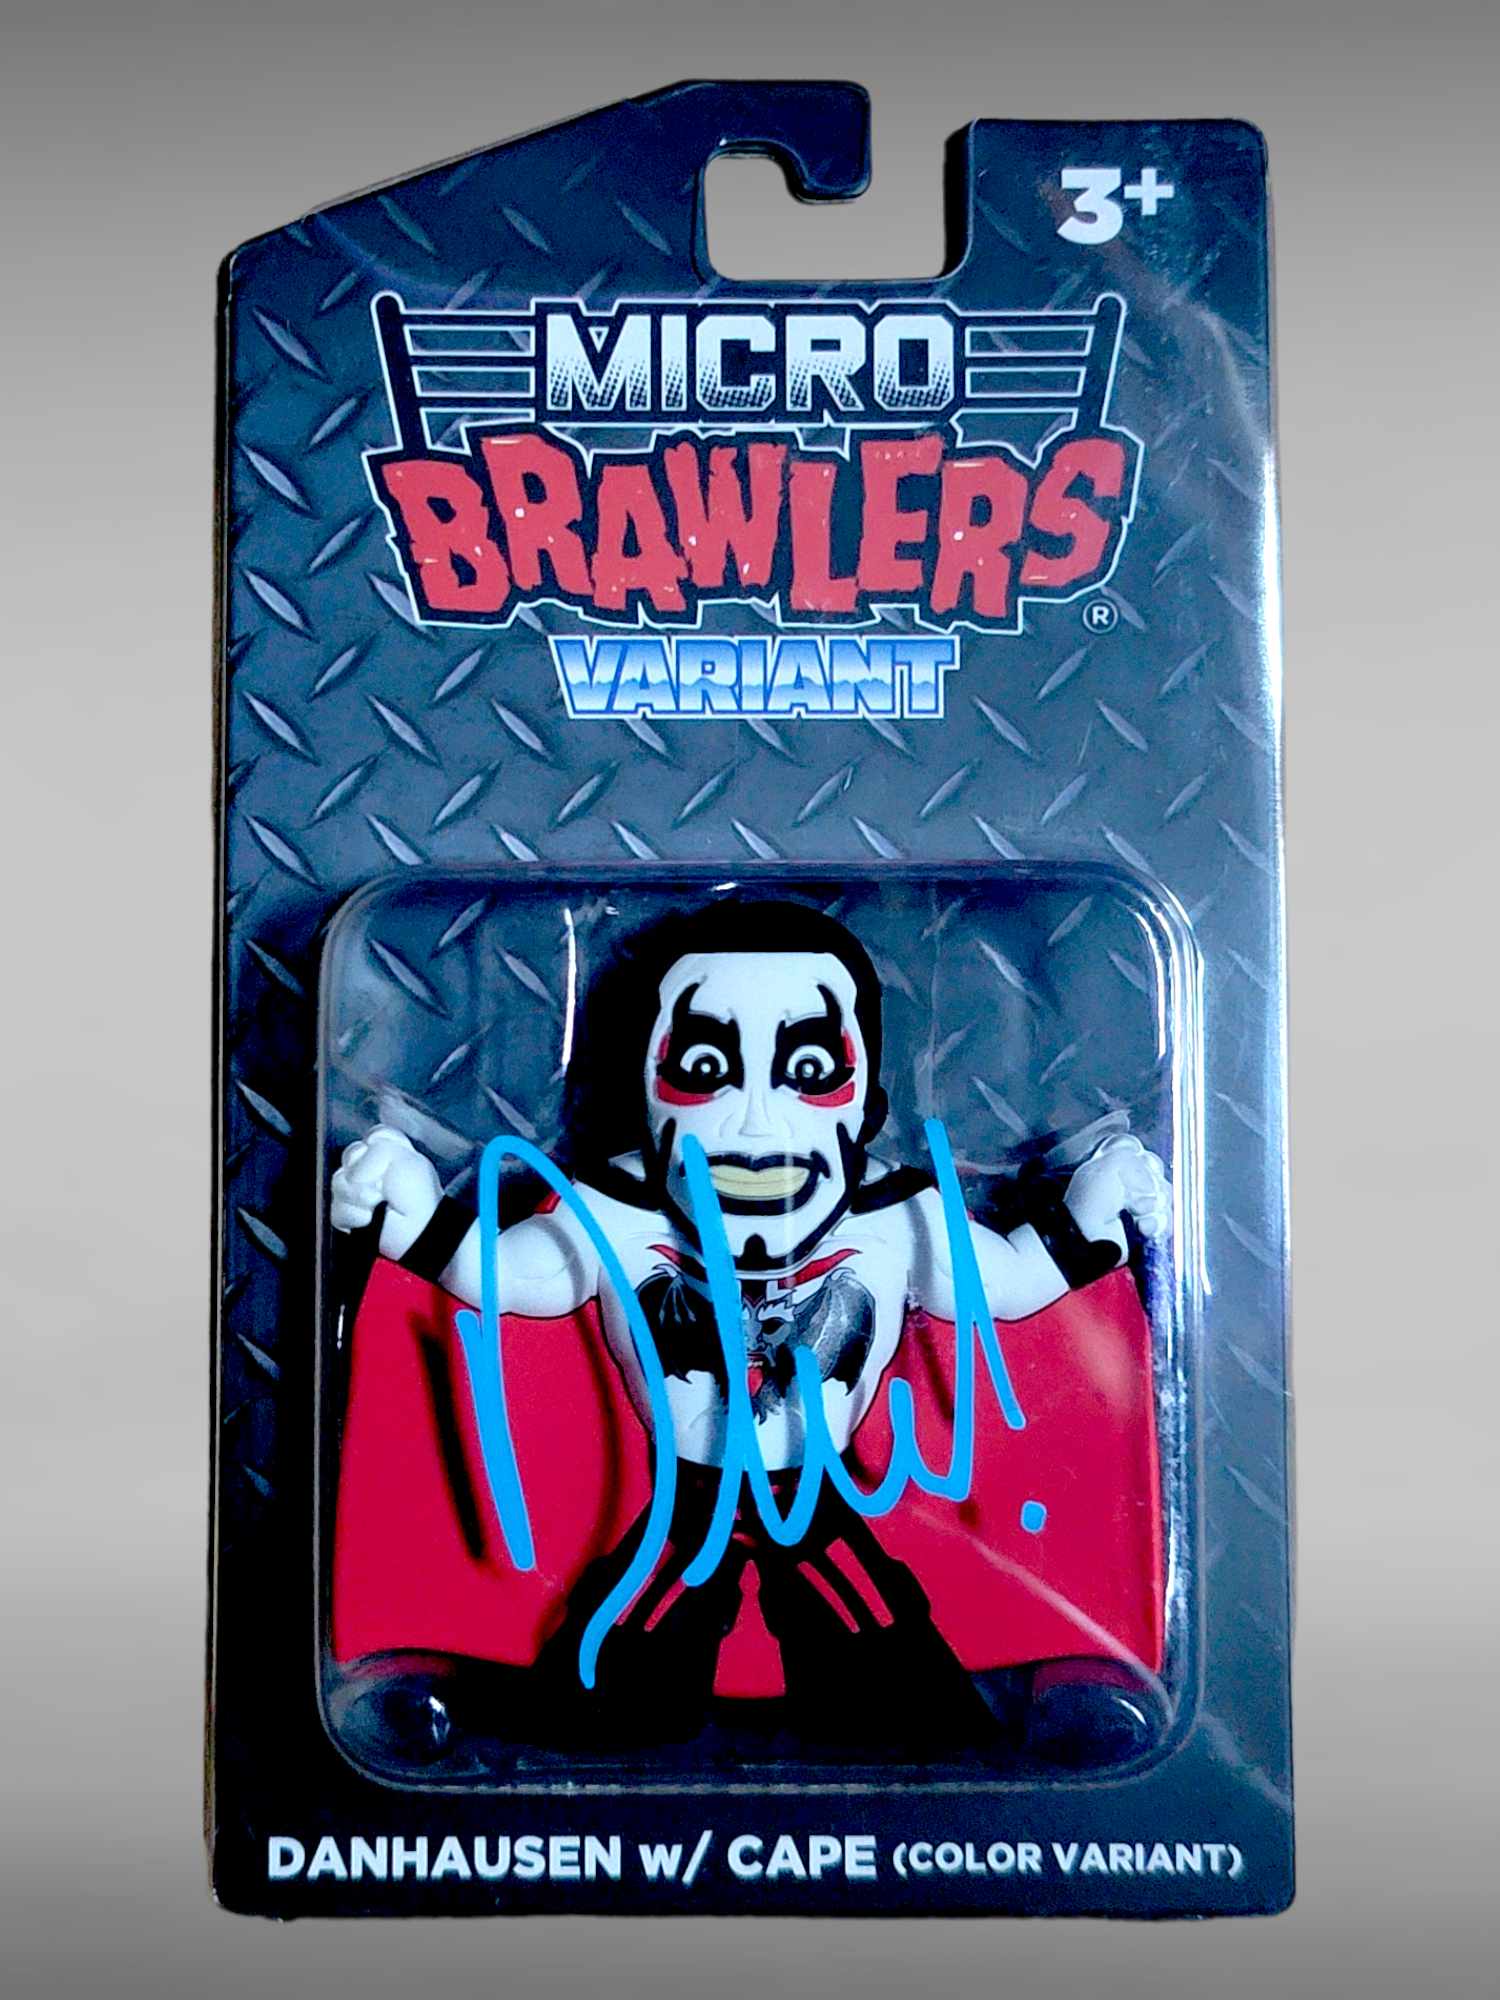 2023 Pro Wrestling Tees Micro Brawlers Danhausen with Cape [Color